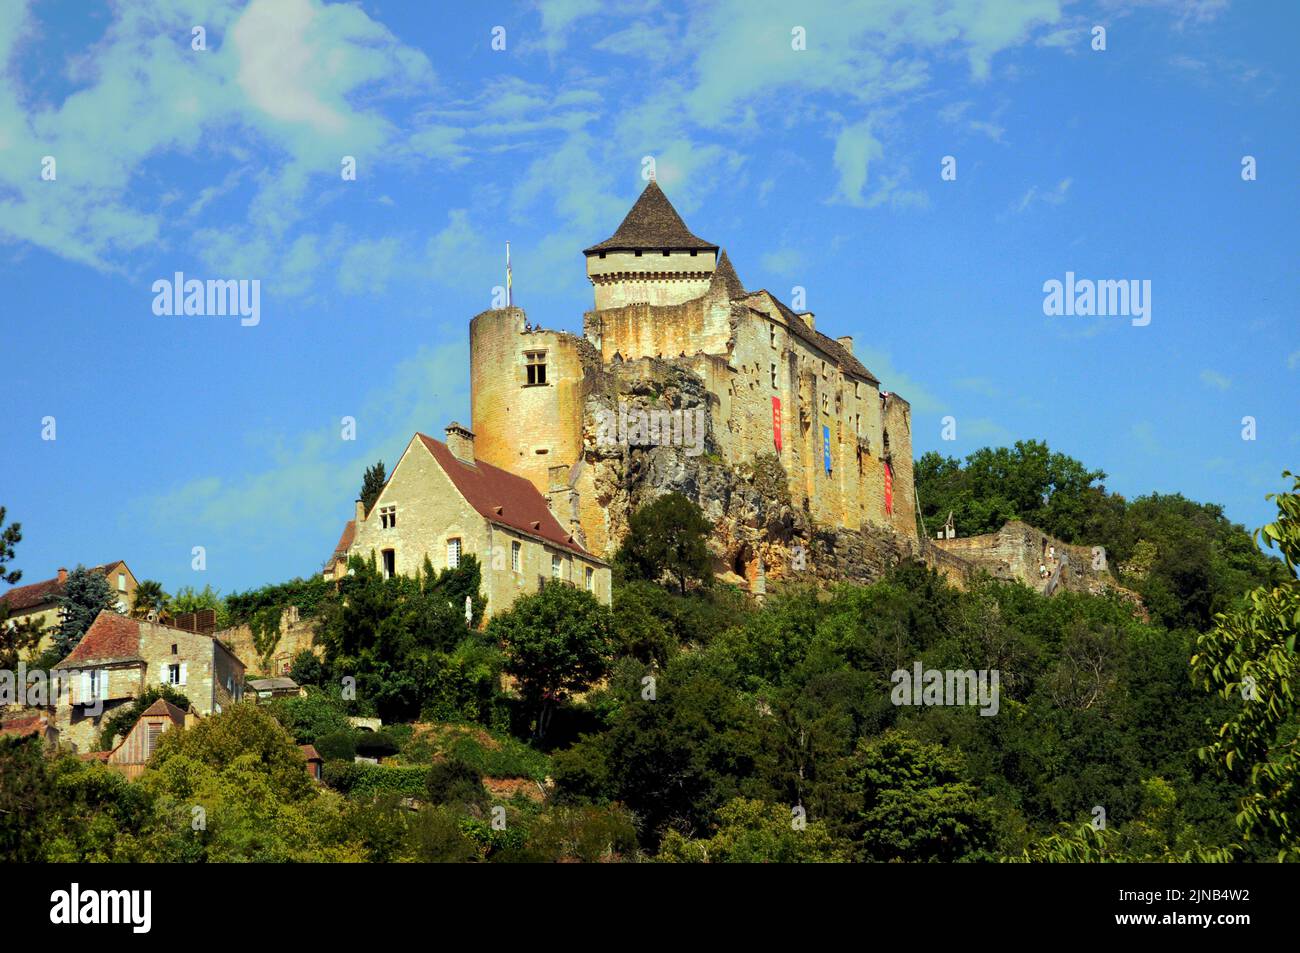 The Chateau de Caslenaud-la-Chapelle overlooks the Dordogne River in the south west of France. It is now privately owned but open to the public. Stock Photo